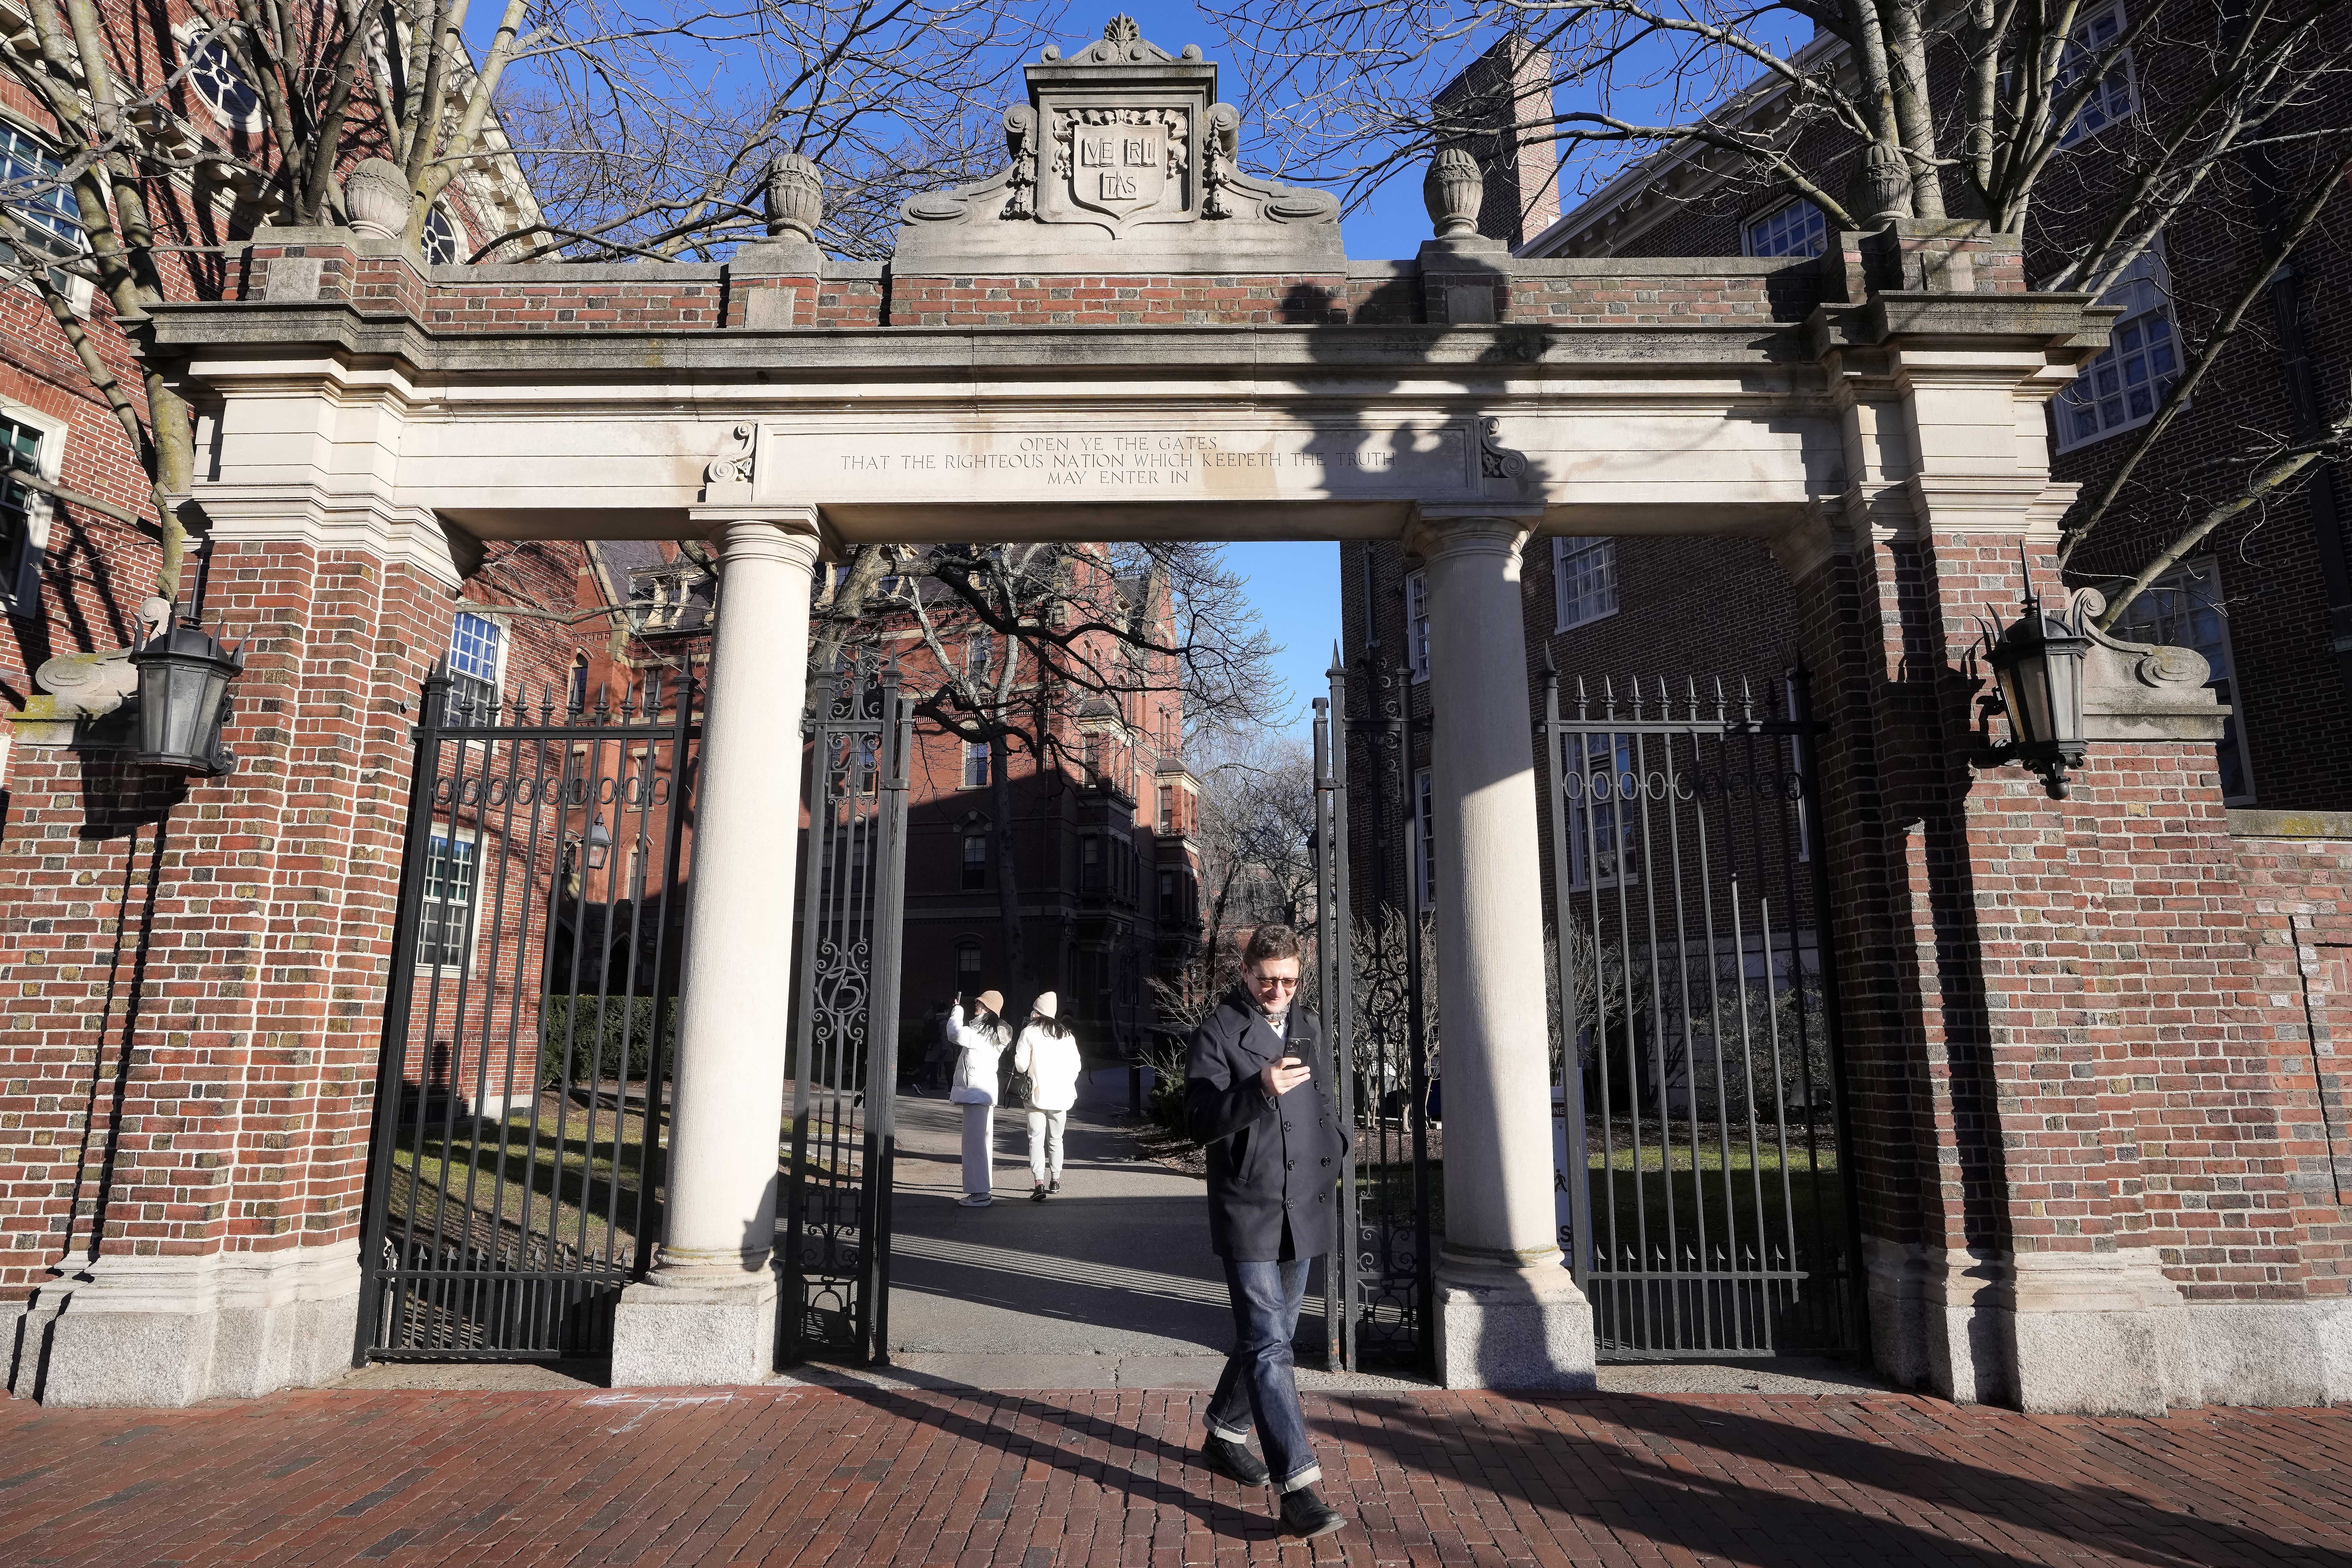 A passer-by walks through a gate to the Harvard University campus, Tuesday, Jan. 2, 2024, in Cambridge, Massachusetts. Harvard University President Claudine Gay resigned Tuesday amid plagiarism accusations and criticism over testimony at a congressional hearing where she was unable to say unequivocally that calls on campus for the genocide of Jews would violate the school's conduct policy. Photo credit: Steven Senne, The Associated Press